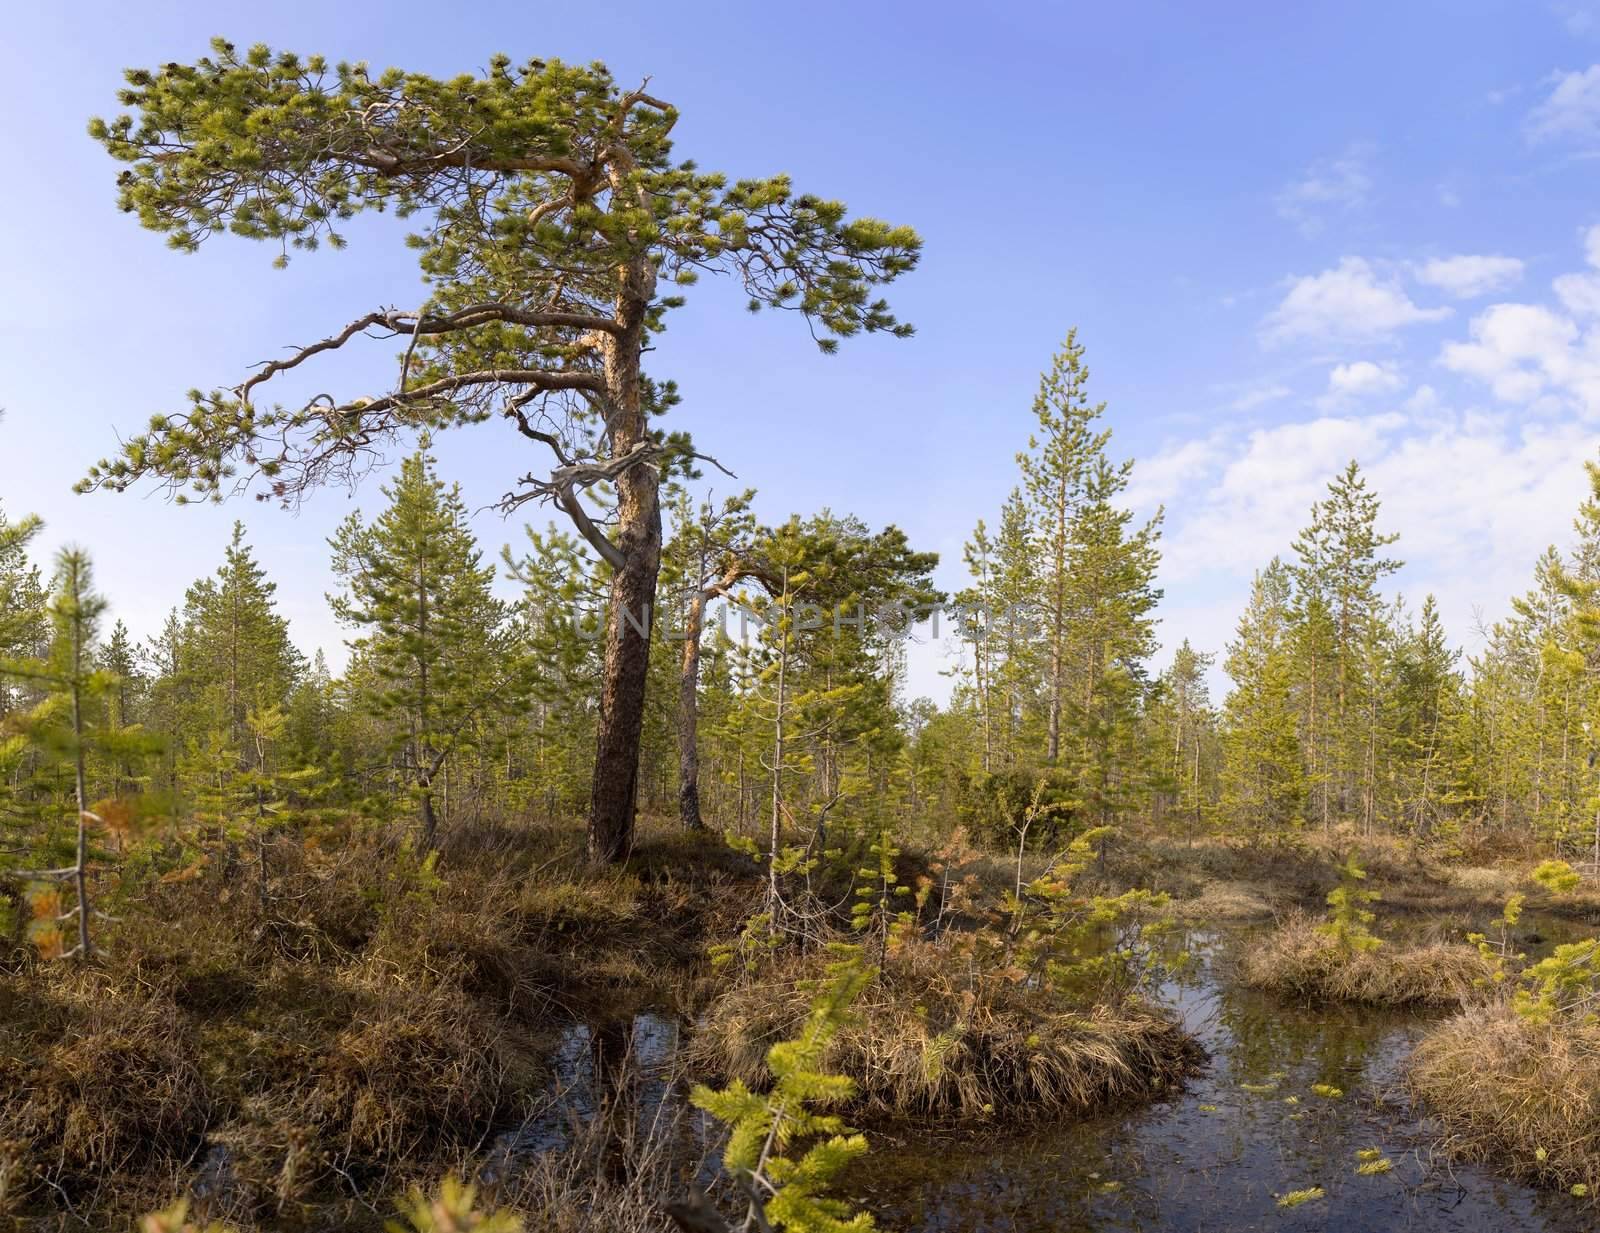 The pine growing among bog (northen country)